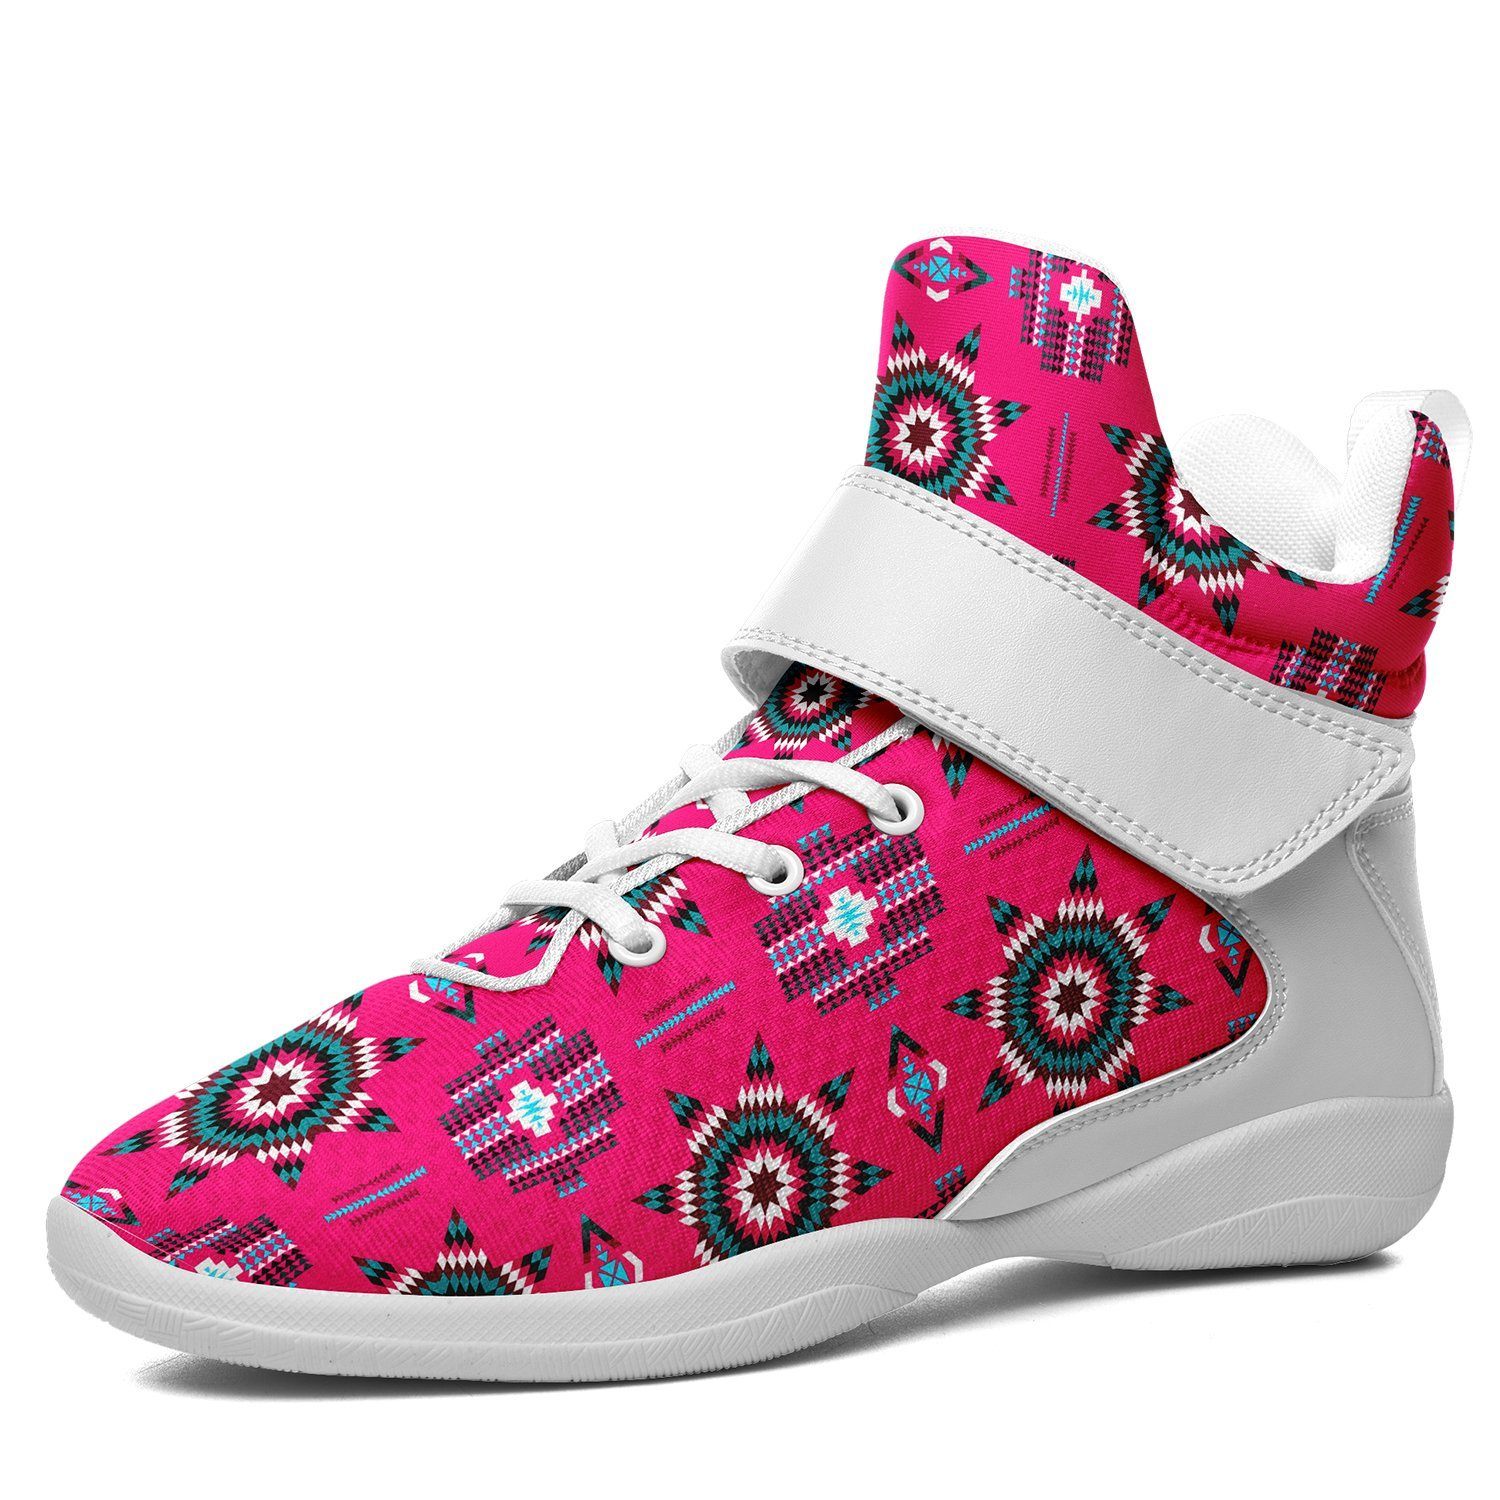 Rising Star Strawberry Moon Ipottaa Basketball / Sport High Top Shoes - White Sole 49 Dzine US Men 7 / EUR 40 White Sole with White Strap 